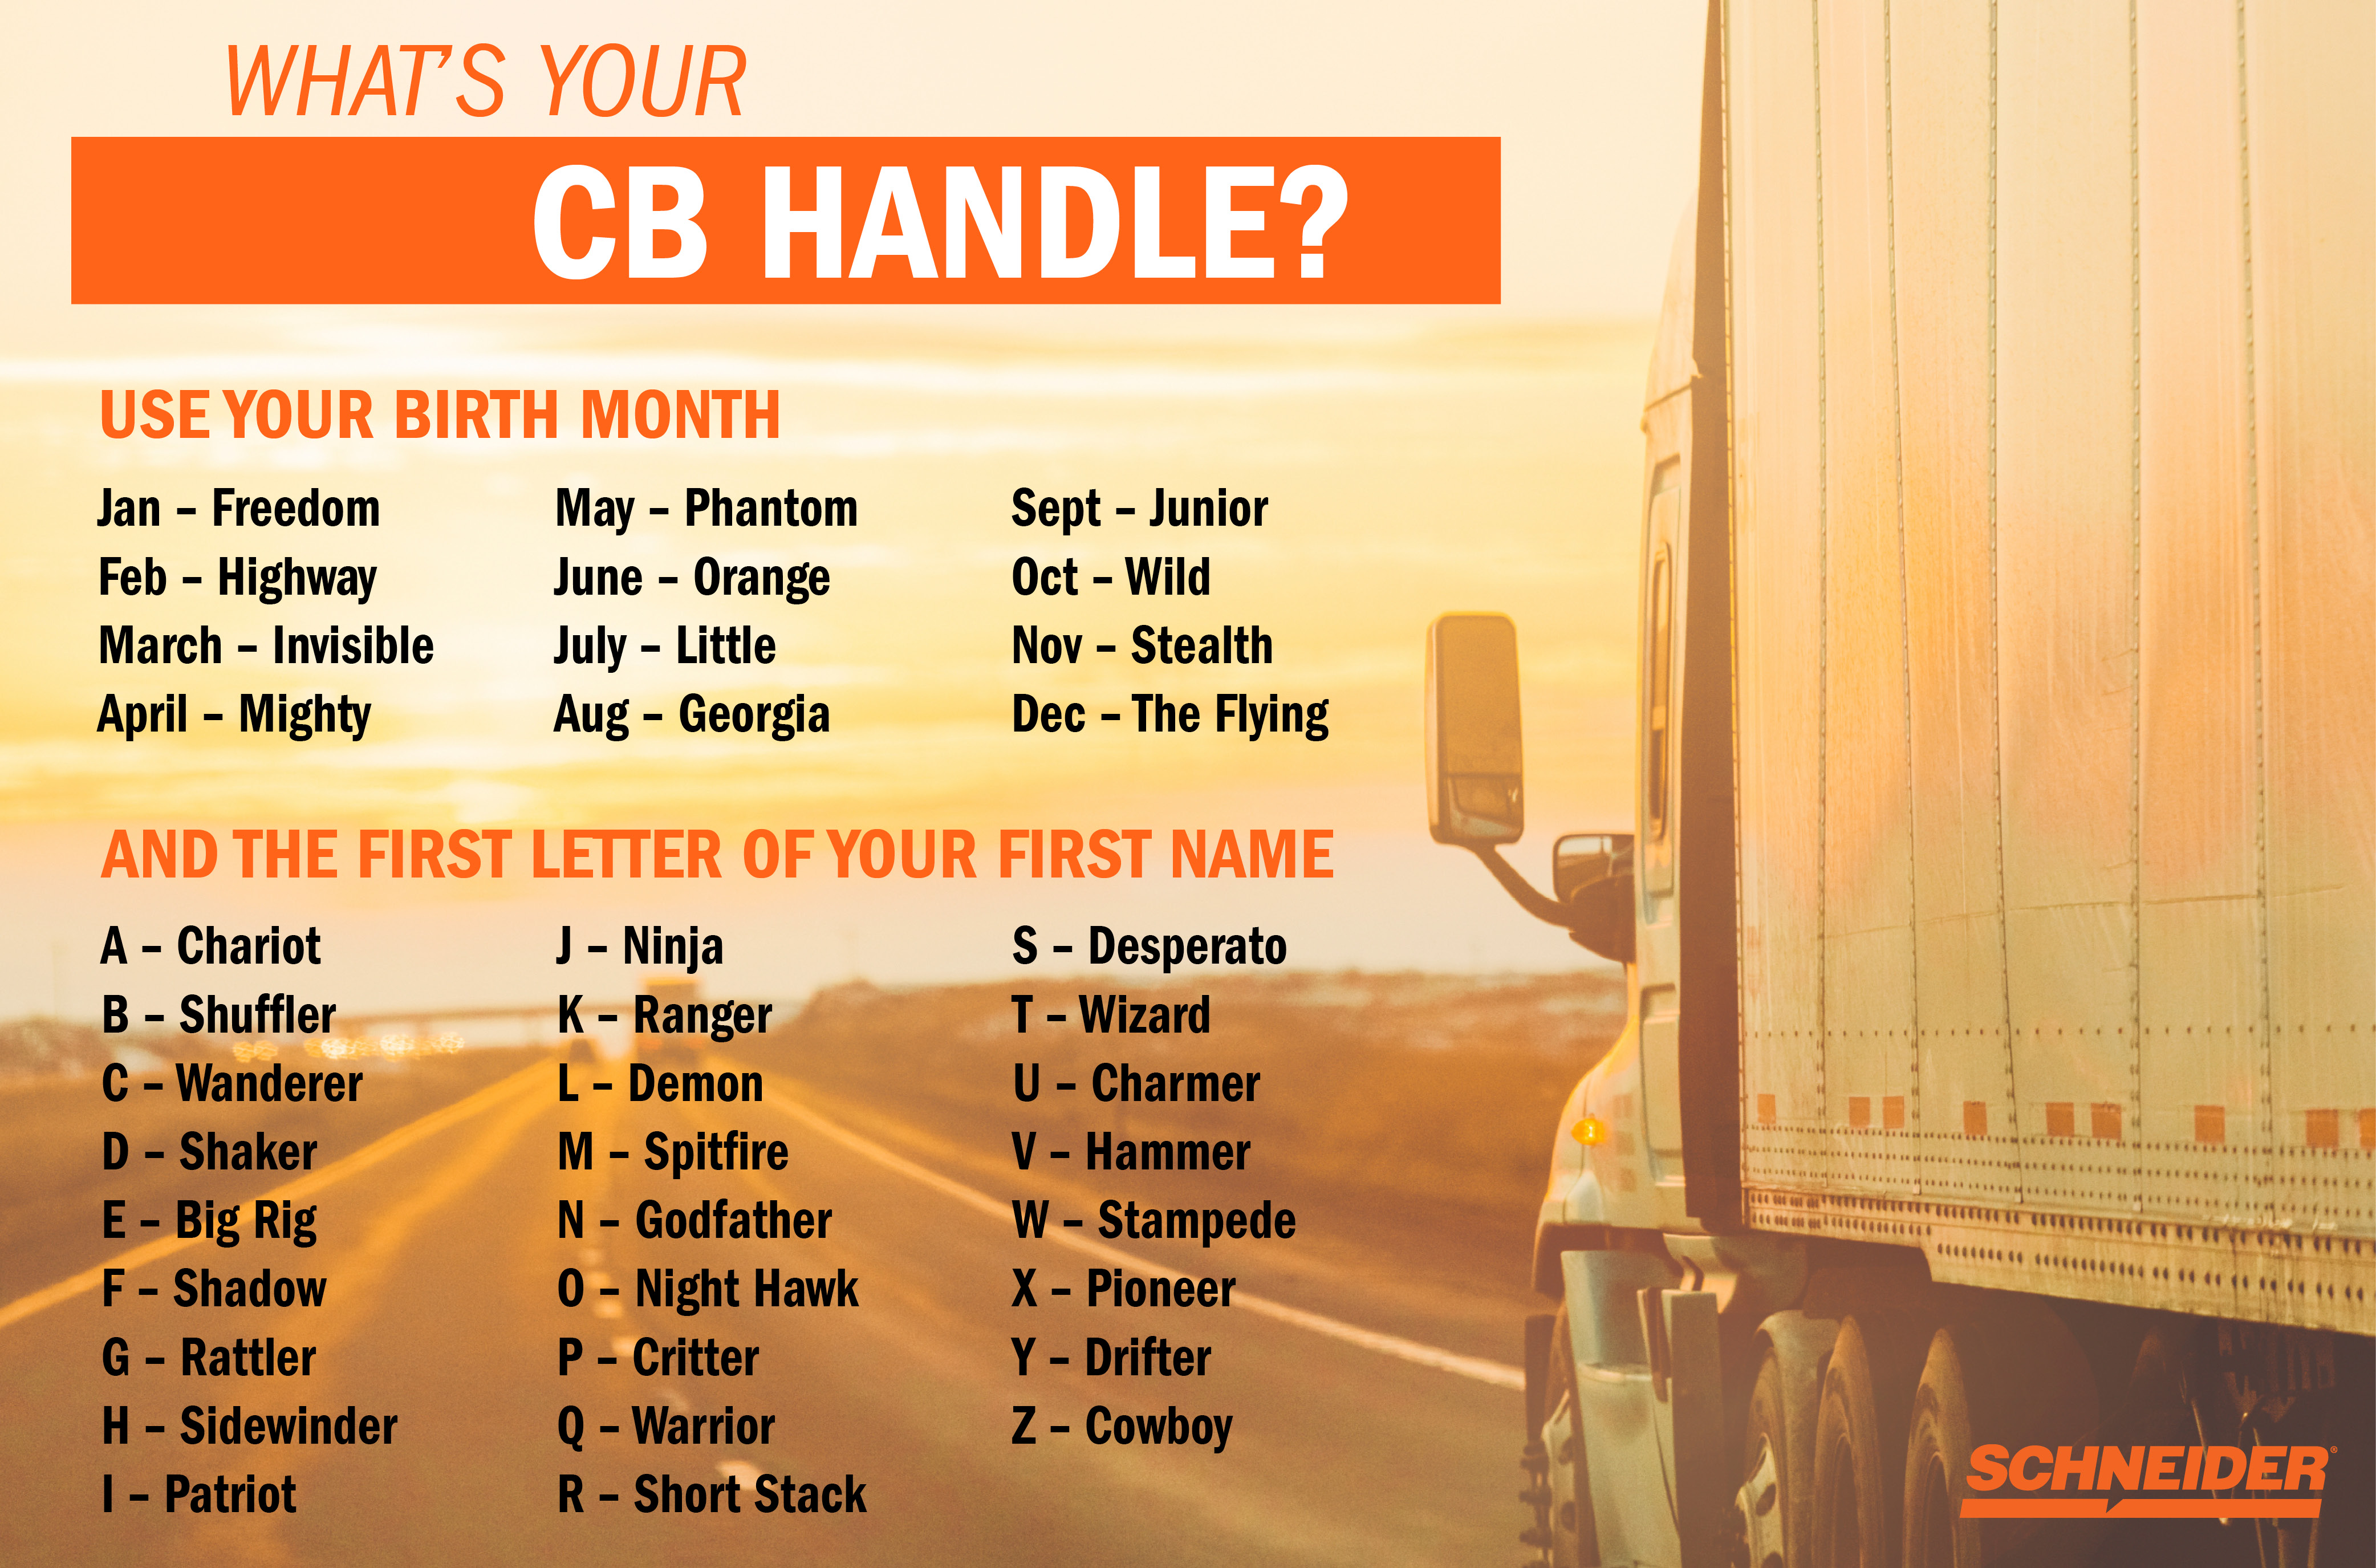 Instructions for generating a CB handle based on your birth month and the first letter of your name.